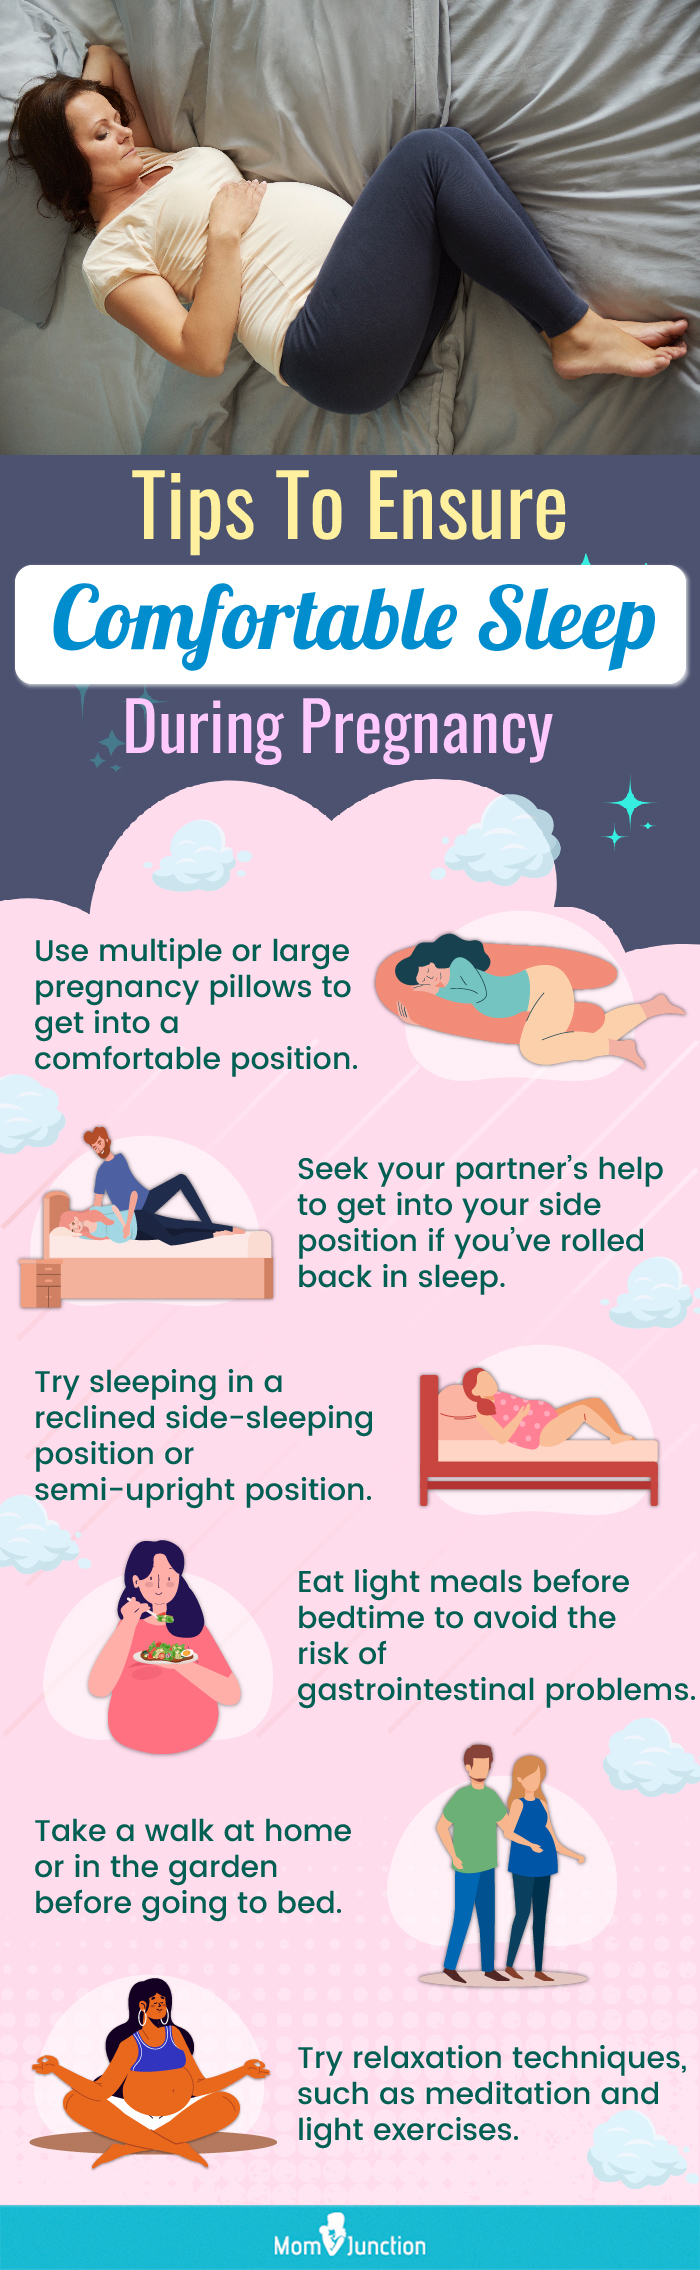 How can I get better sleep while pregnant?